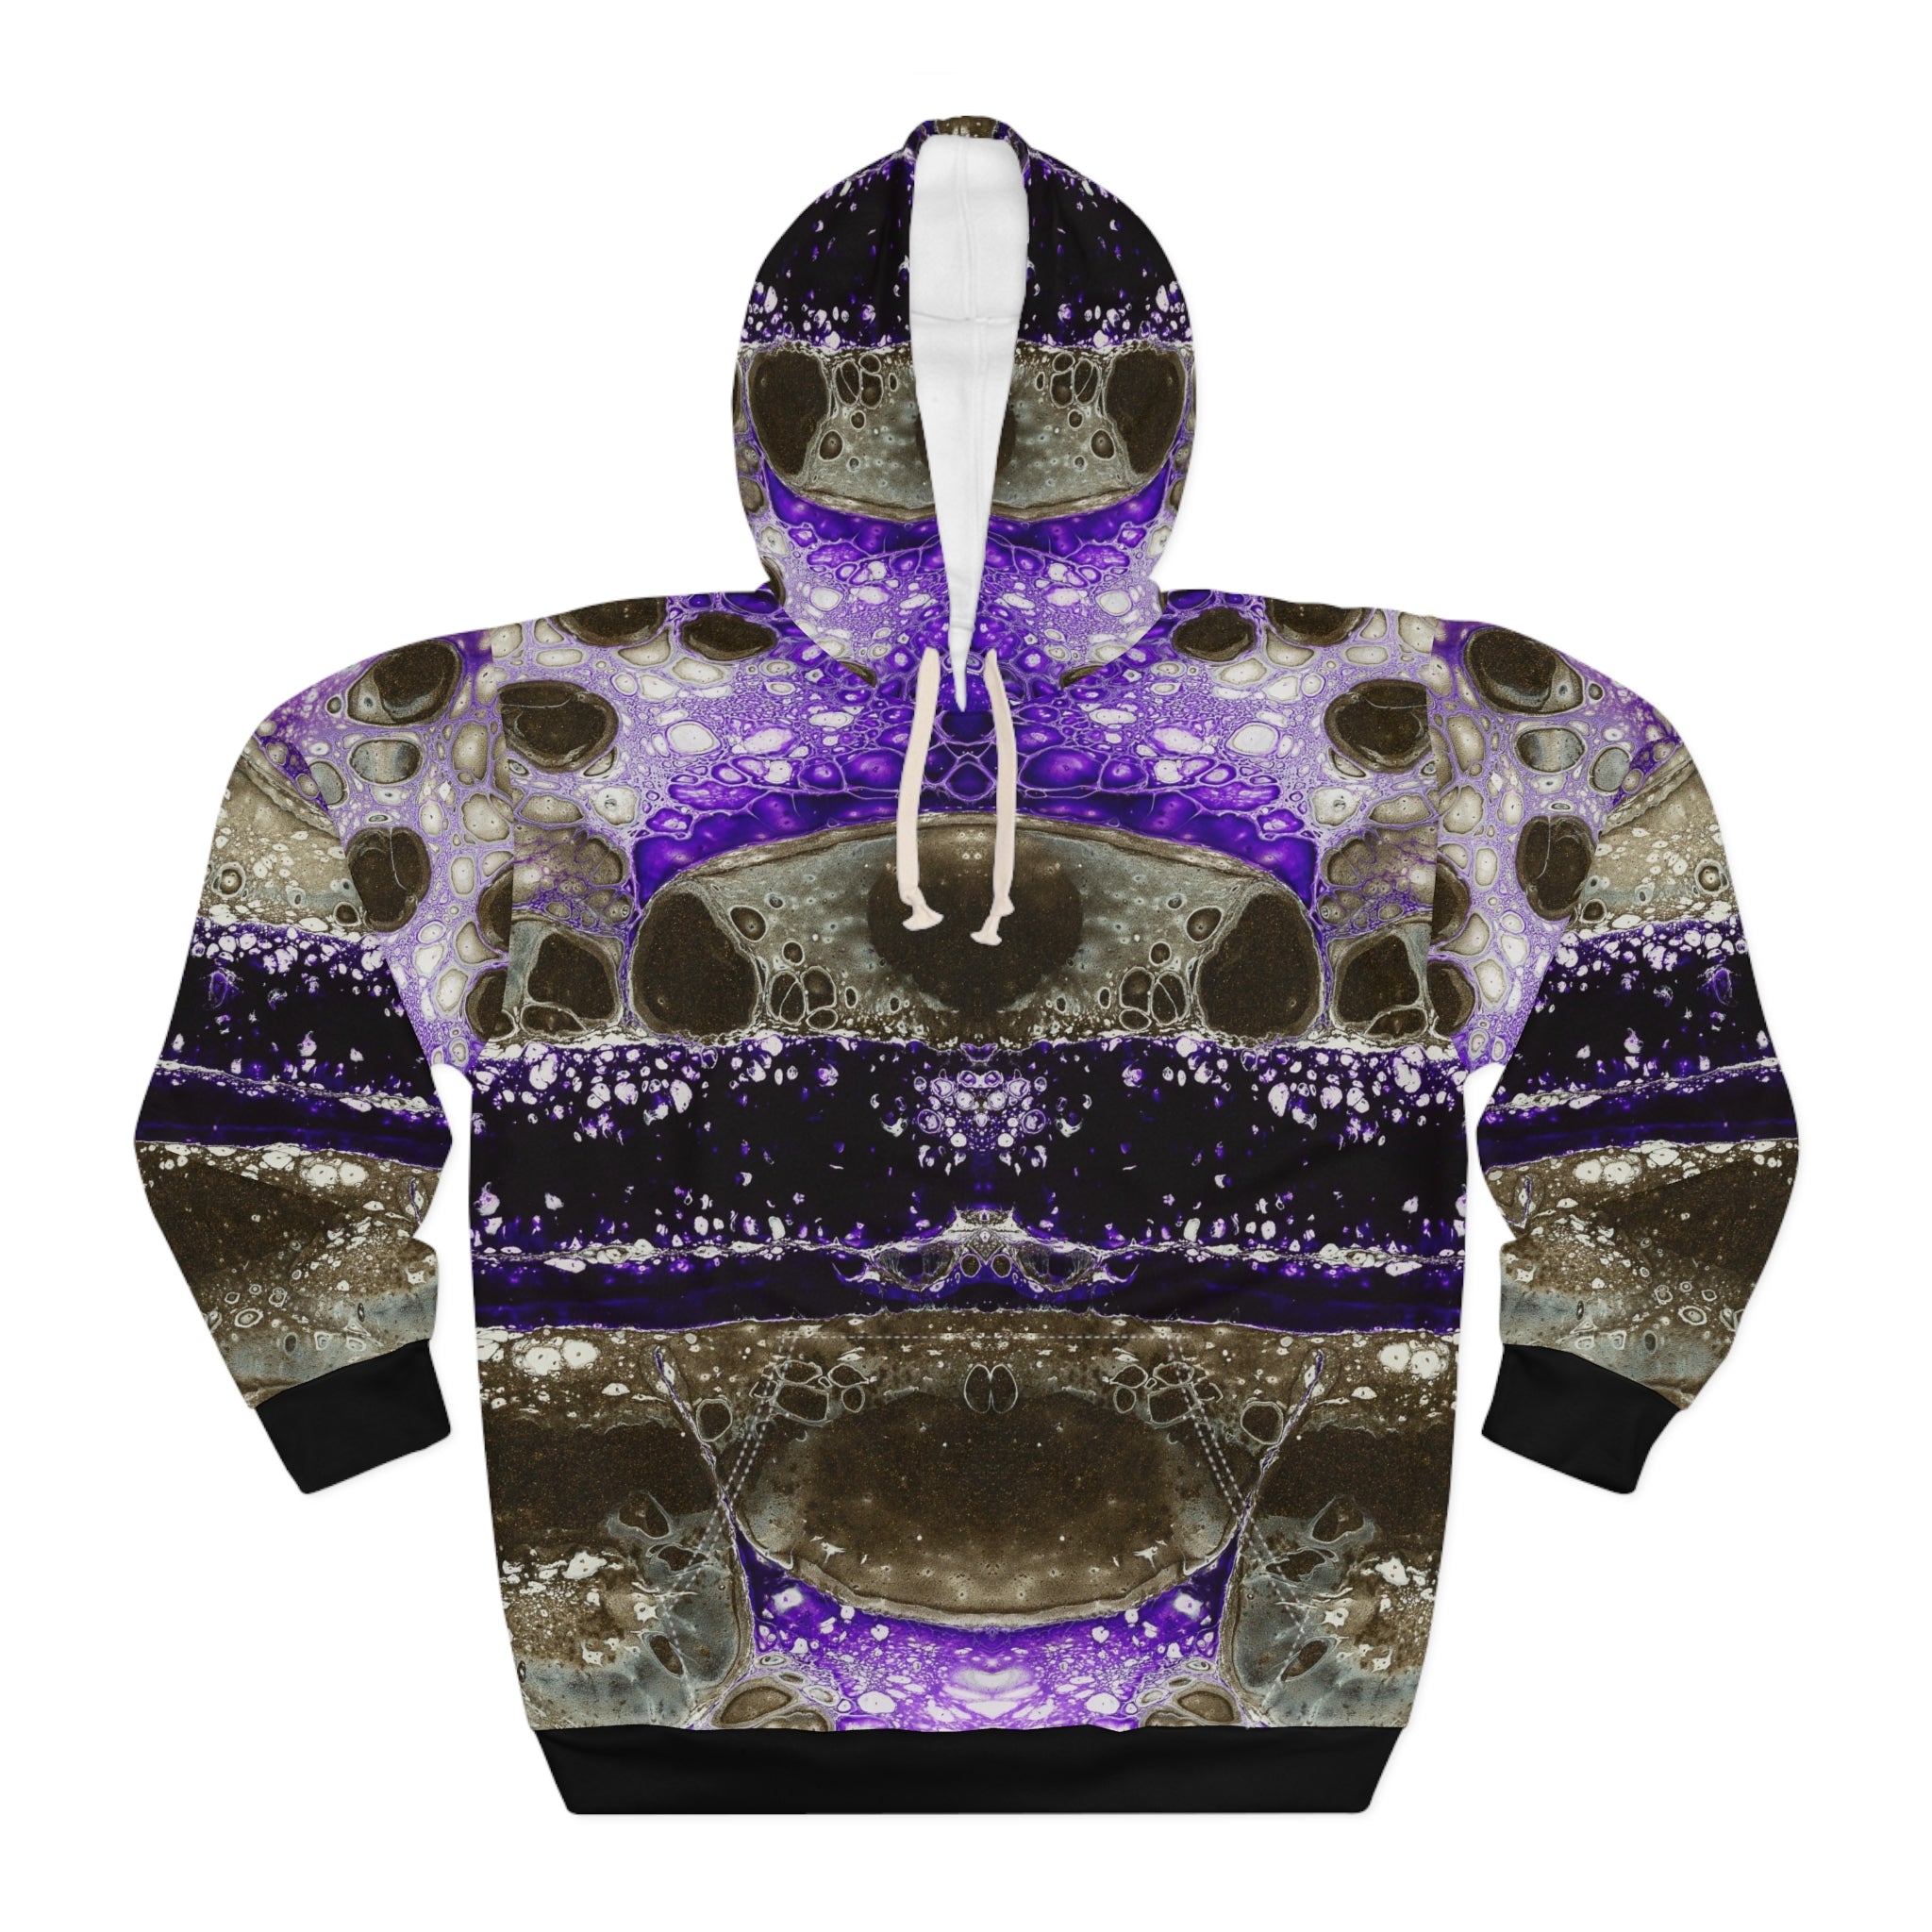 Cameron Creations - The Approach - Pullover Hoodie - Front